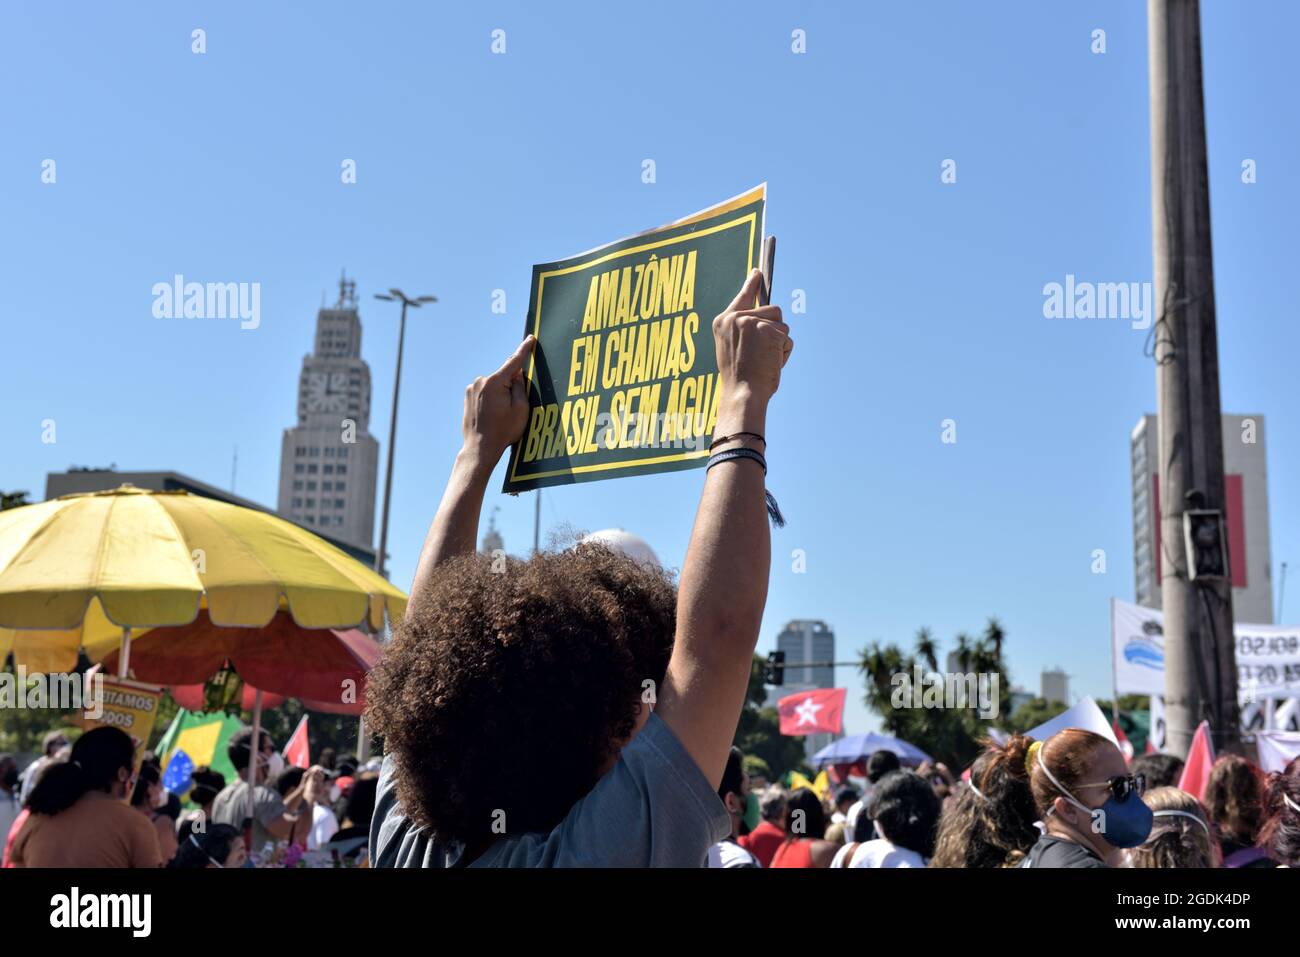 July 24, 2021: Brazilian protesters have marched through the heart of Rio de Janeiro to tell far-right president, Jair Bolsonaro, they want him out. Stock Photo